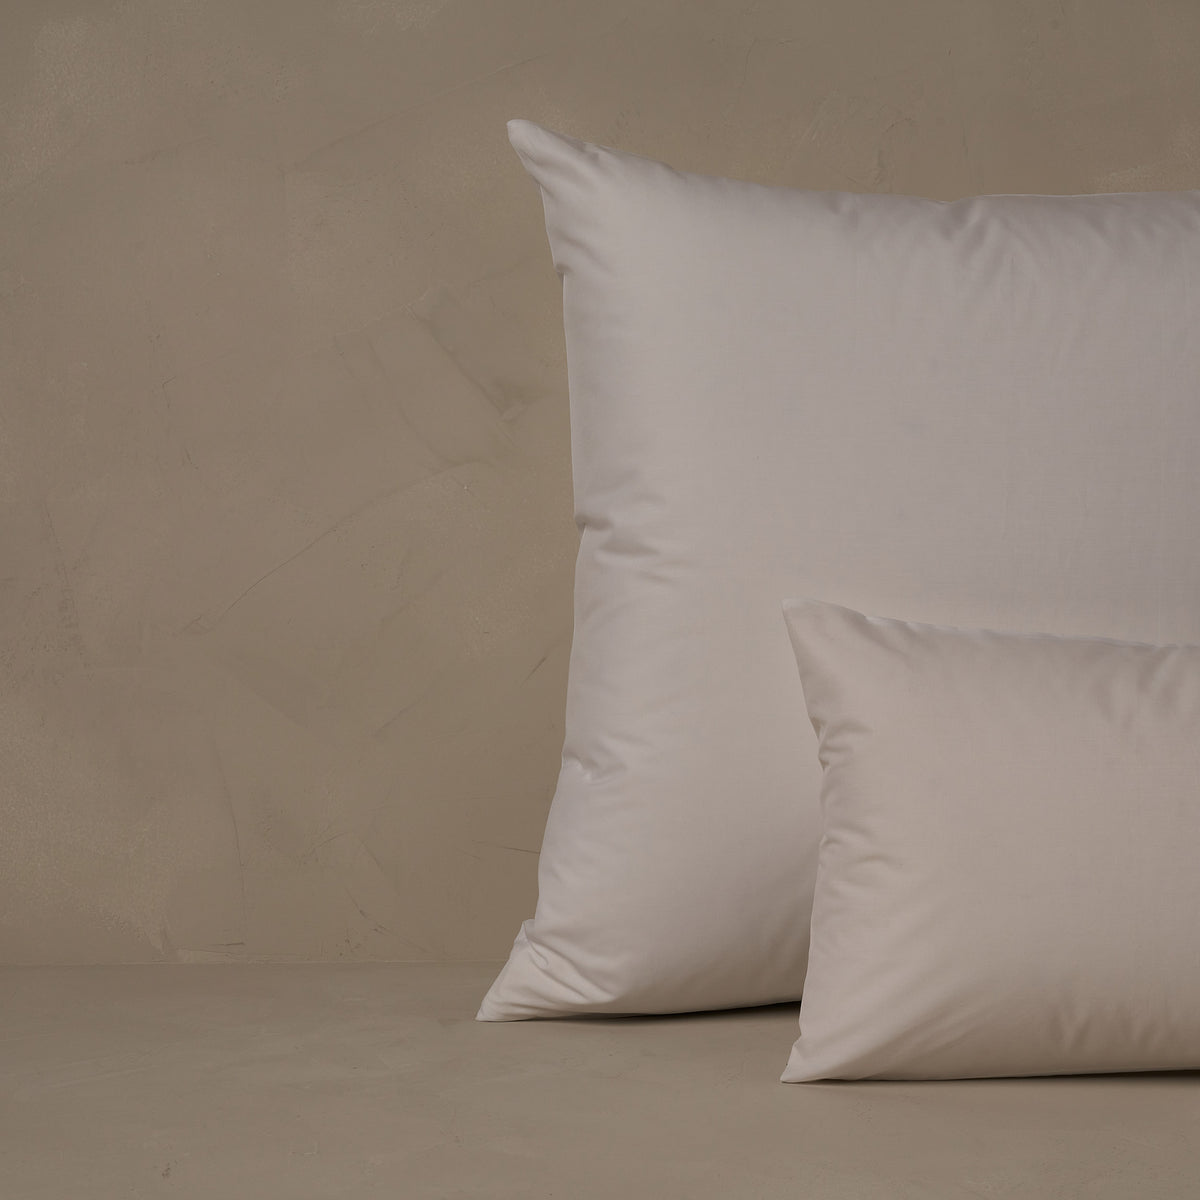 An image of a small boudoir or travel size pillow stacked in front of a large euro size pillow. The pillow cases are made in Italy of crisp and cool LETTO Giza Reserve Cotton Percale in color white. data-image-id=